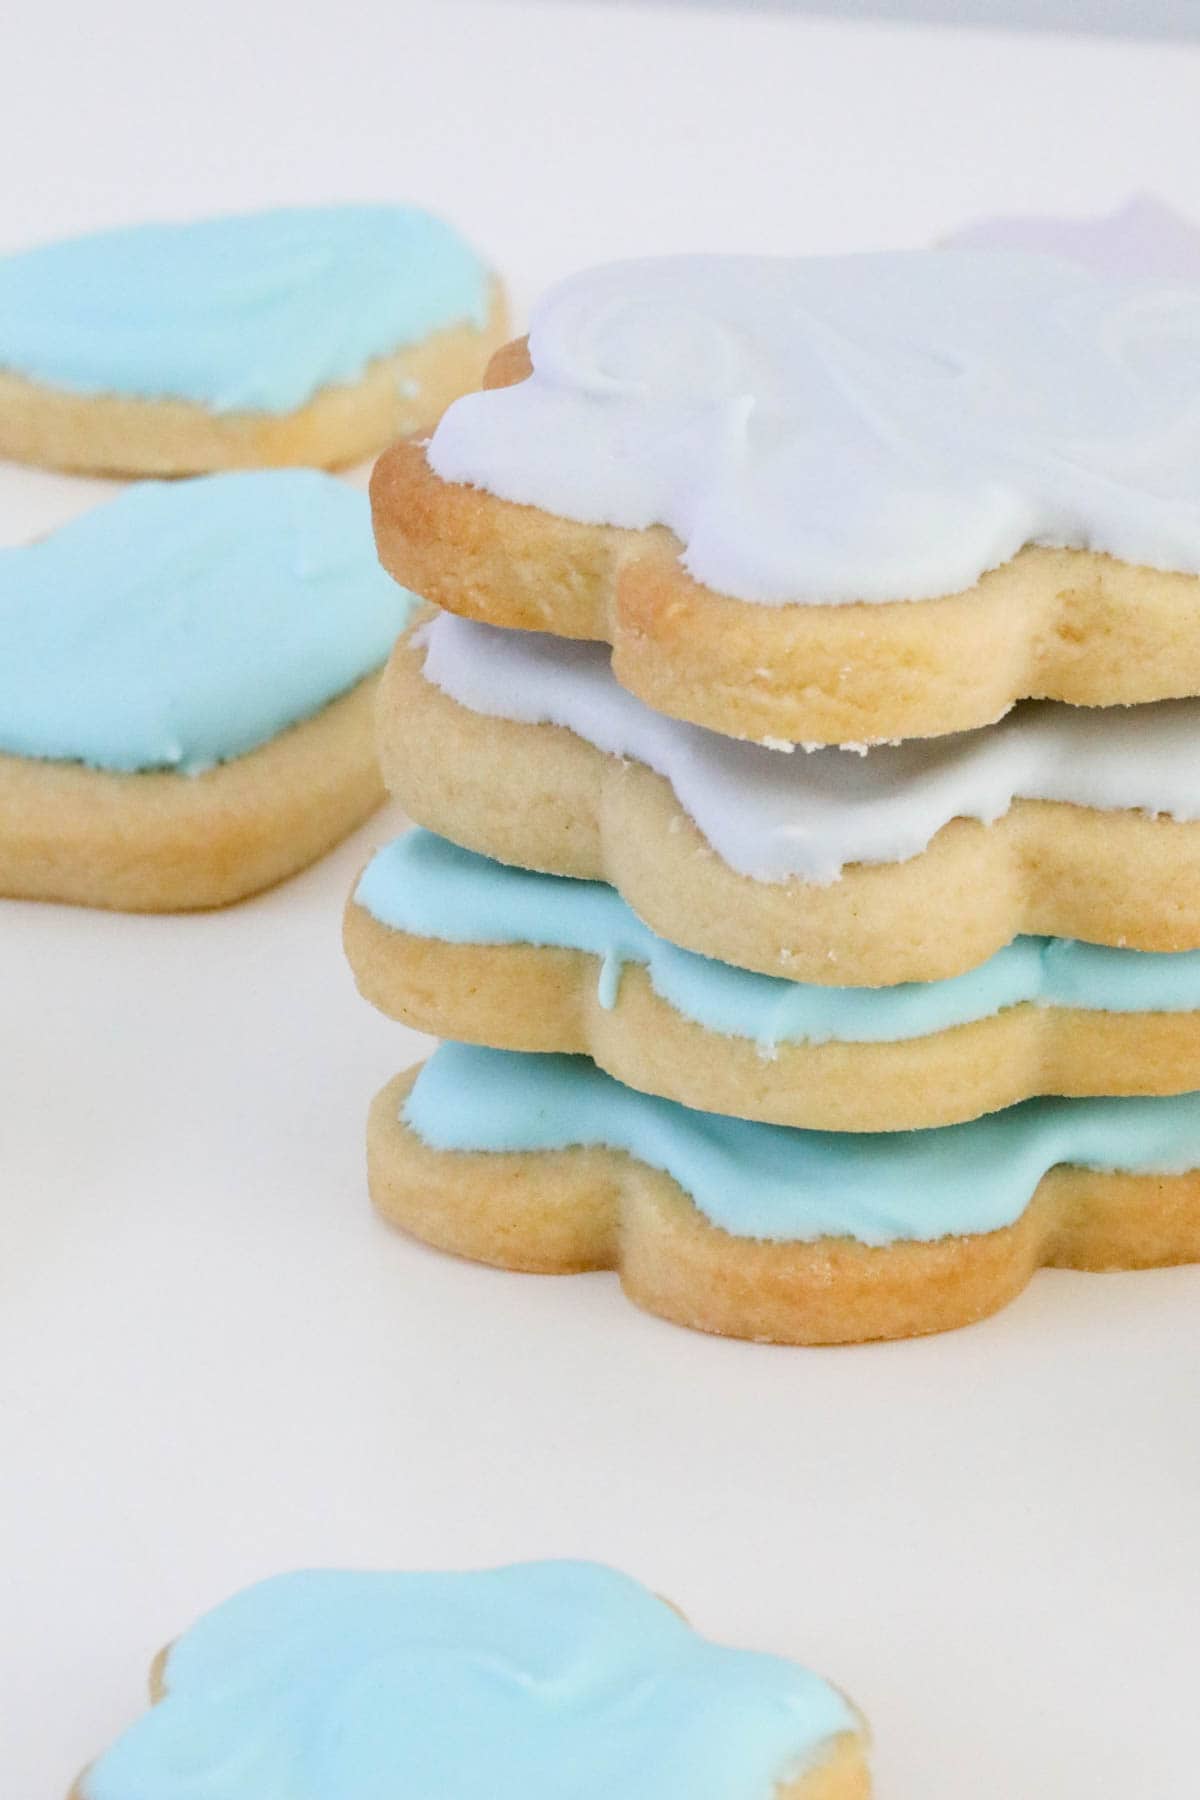 Side view of a stack of 4 iced flower shaped biscuits.